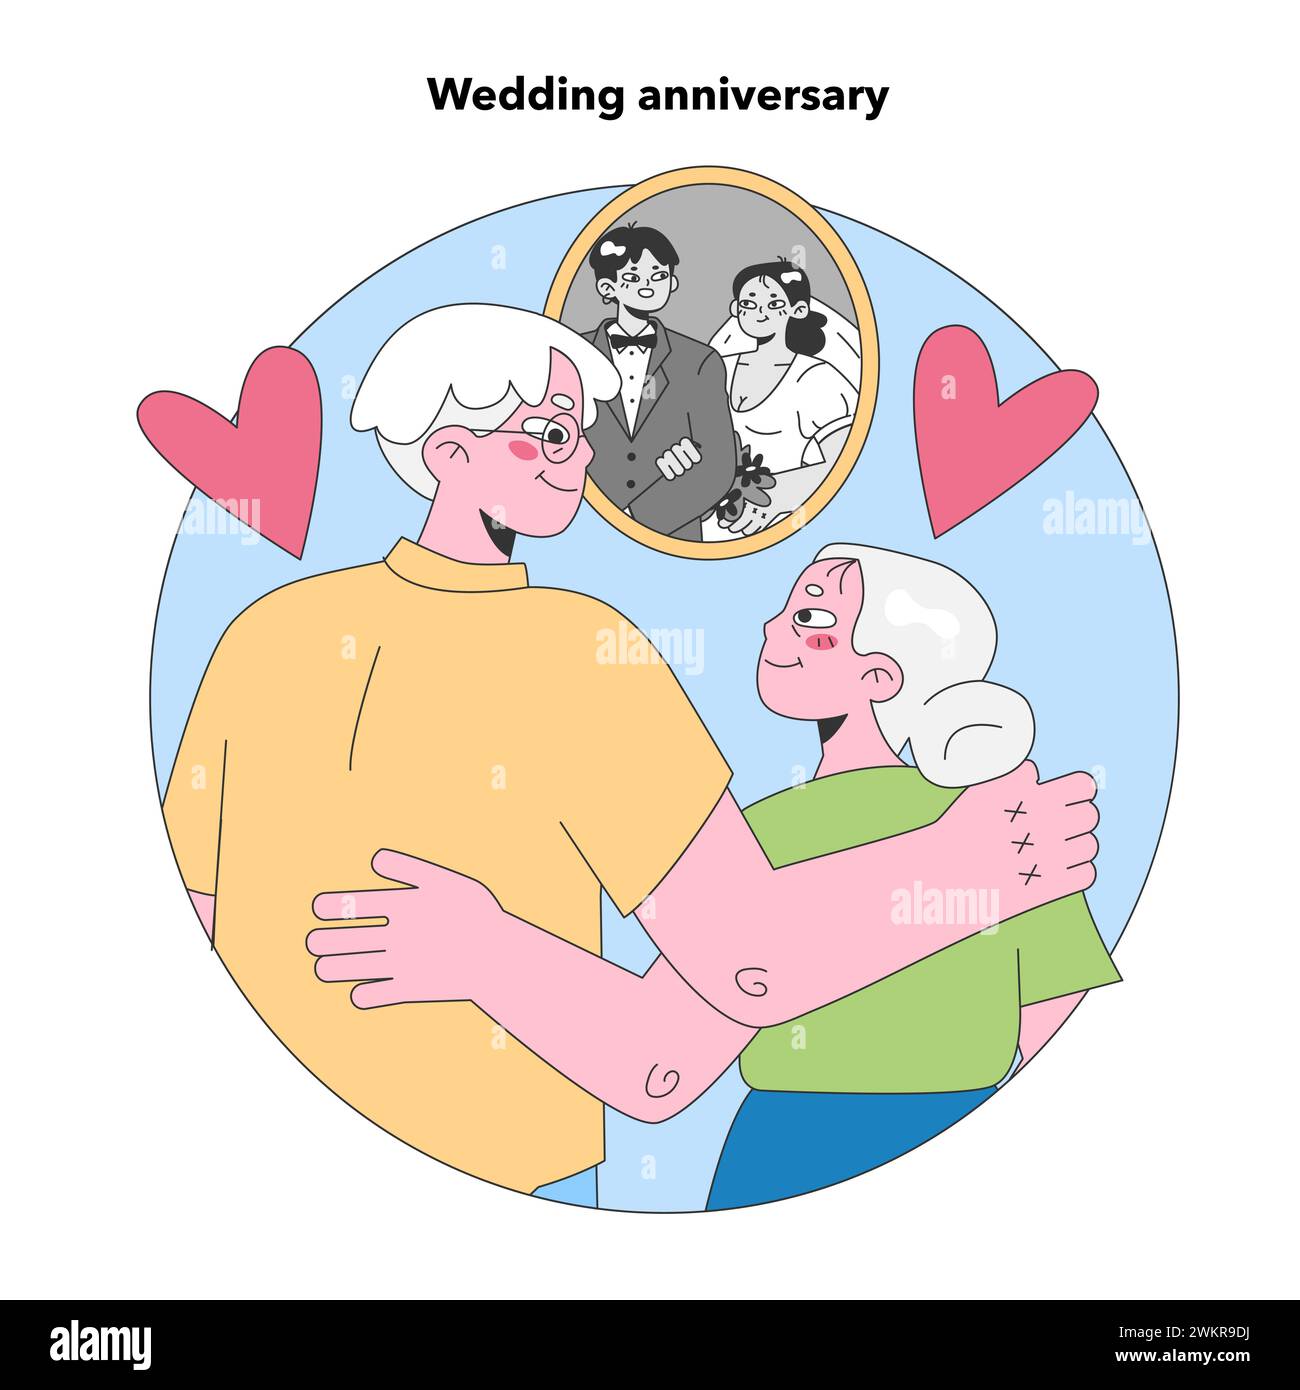 Wedding Anniversary. Elderly couple reminisces about their lifelong journey, cherishing their love and companionship. Flat vector illustration. Stock Vector